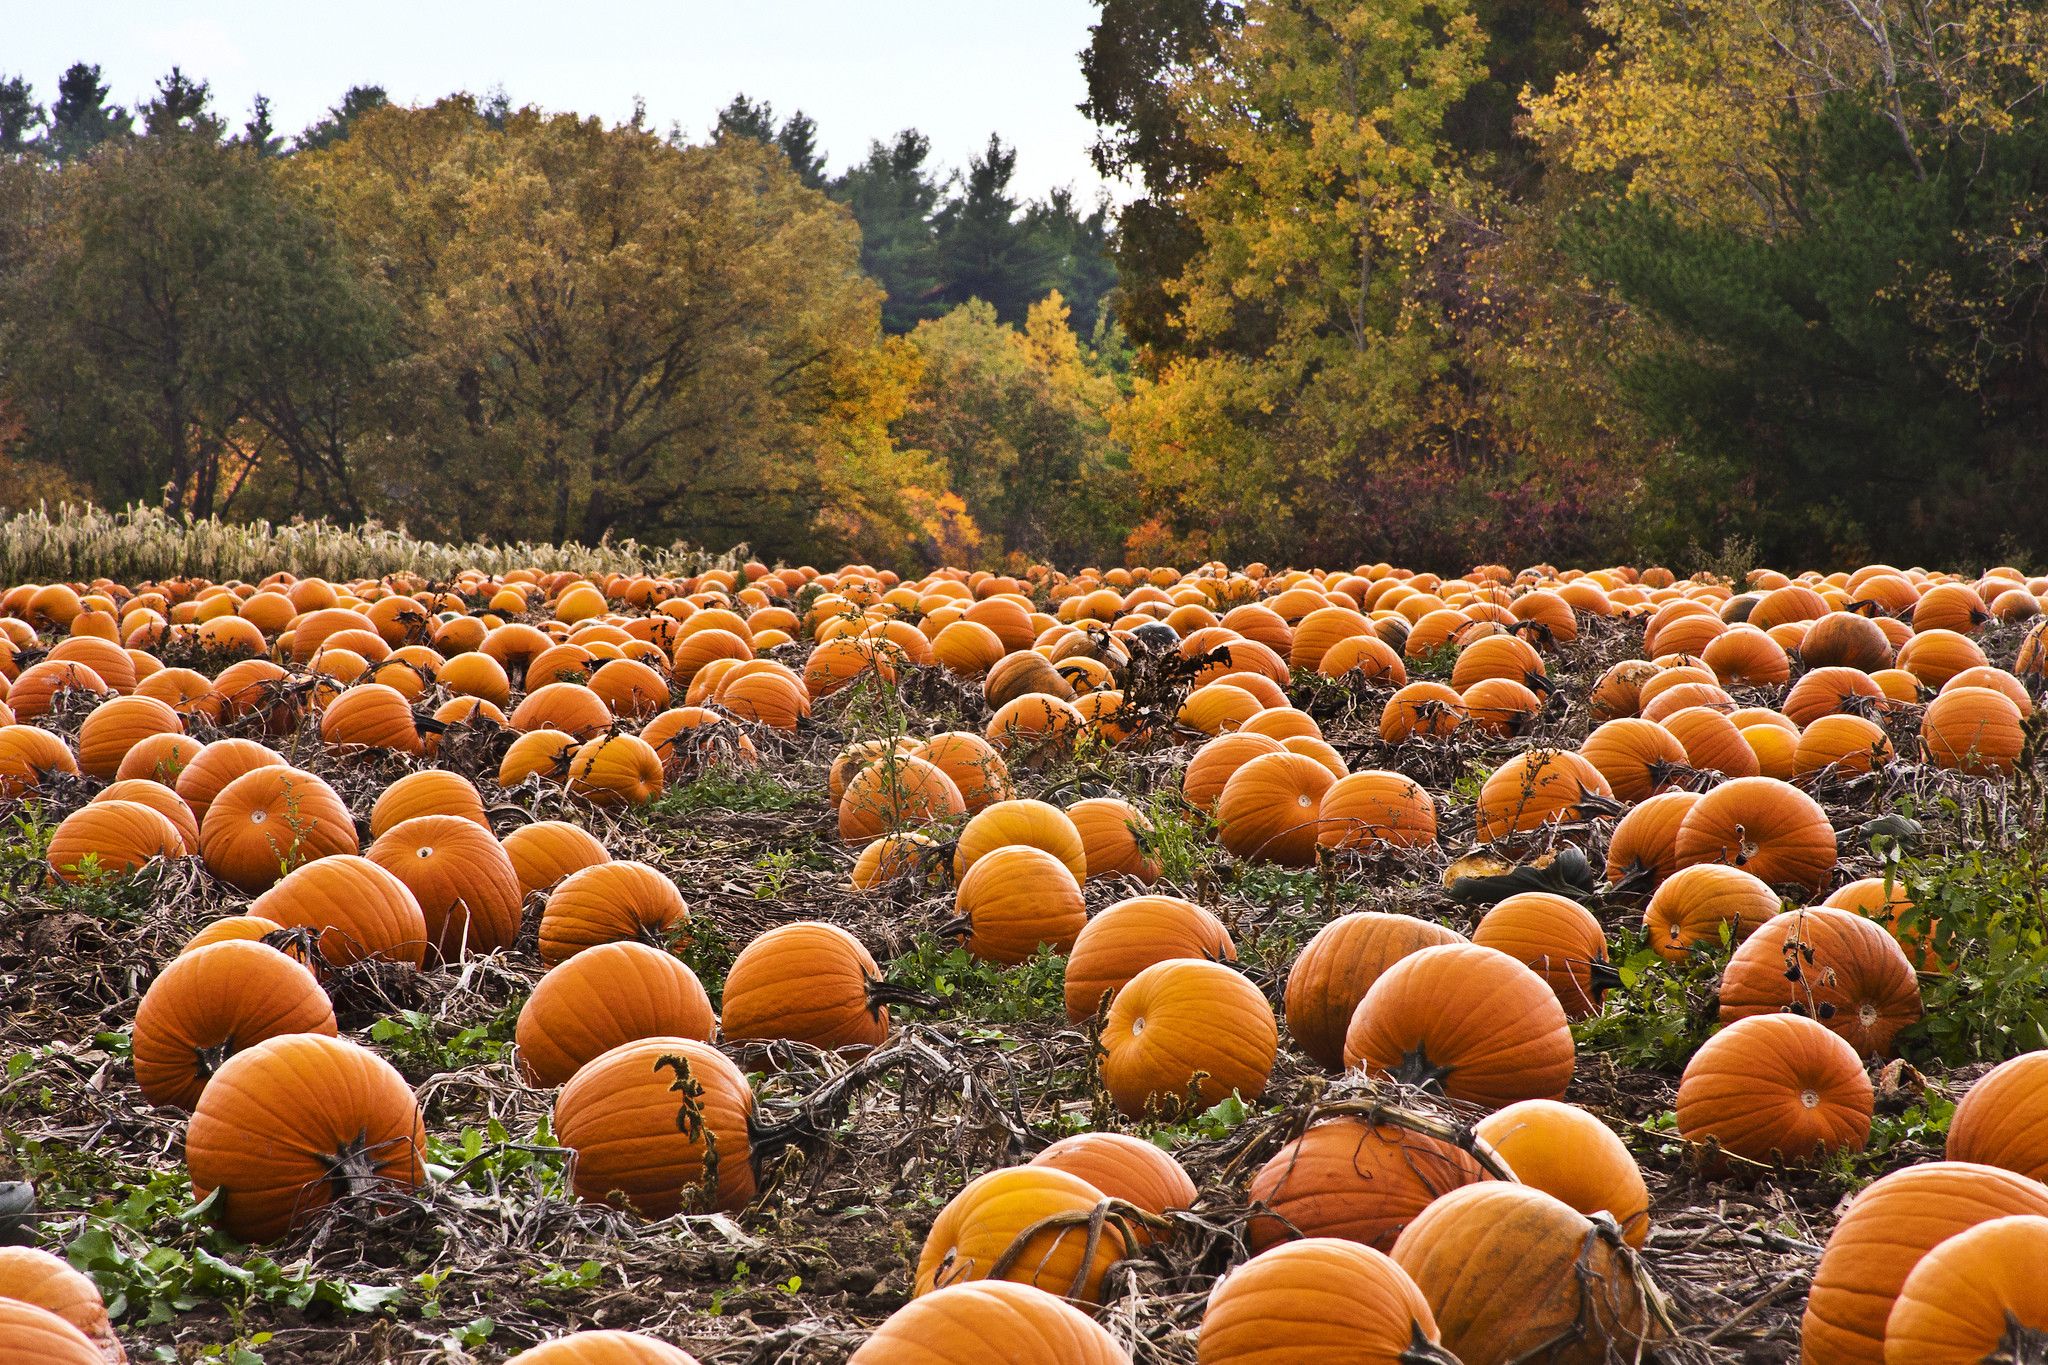 A pumpkin patch with trees in the background. - Fall, pumpkin